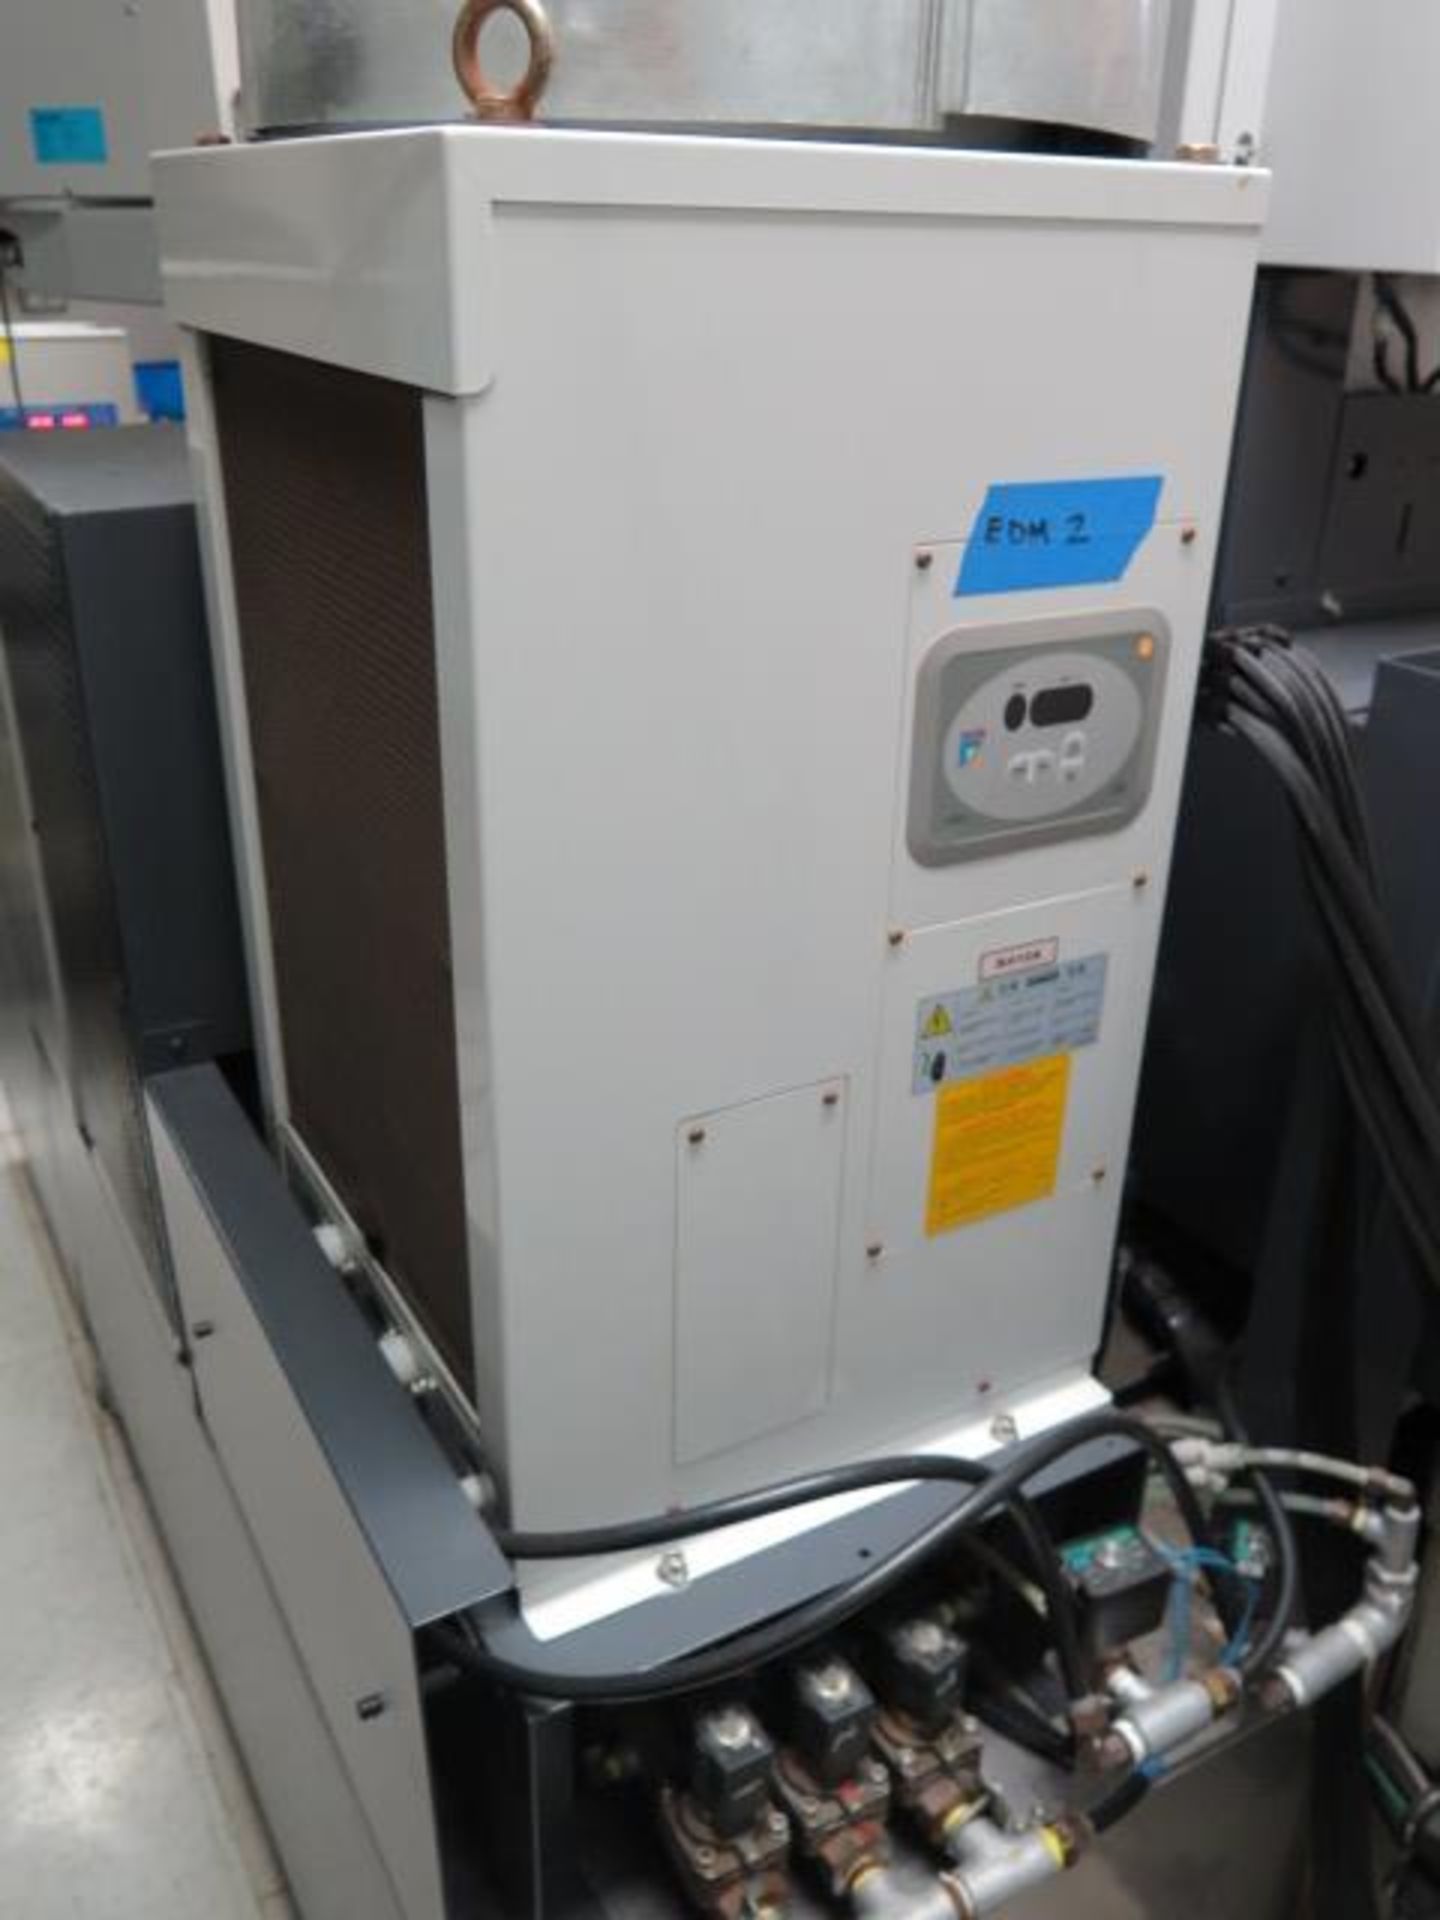 2014 Mitsubishi MD+ PRO III mdl. MV1200S CNC Wire EDM s/n 54D1M091 w/ Mitsubishi M700, SOLD AS IS - Image 22 of 27